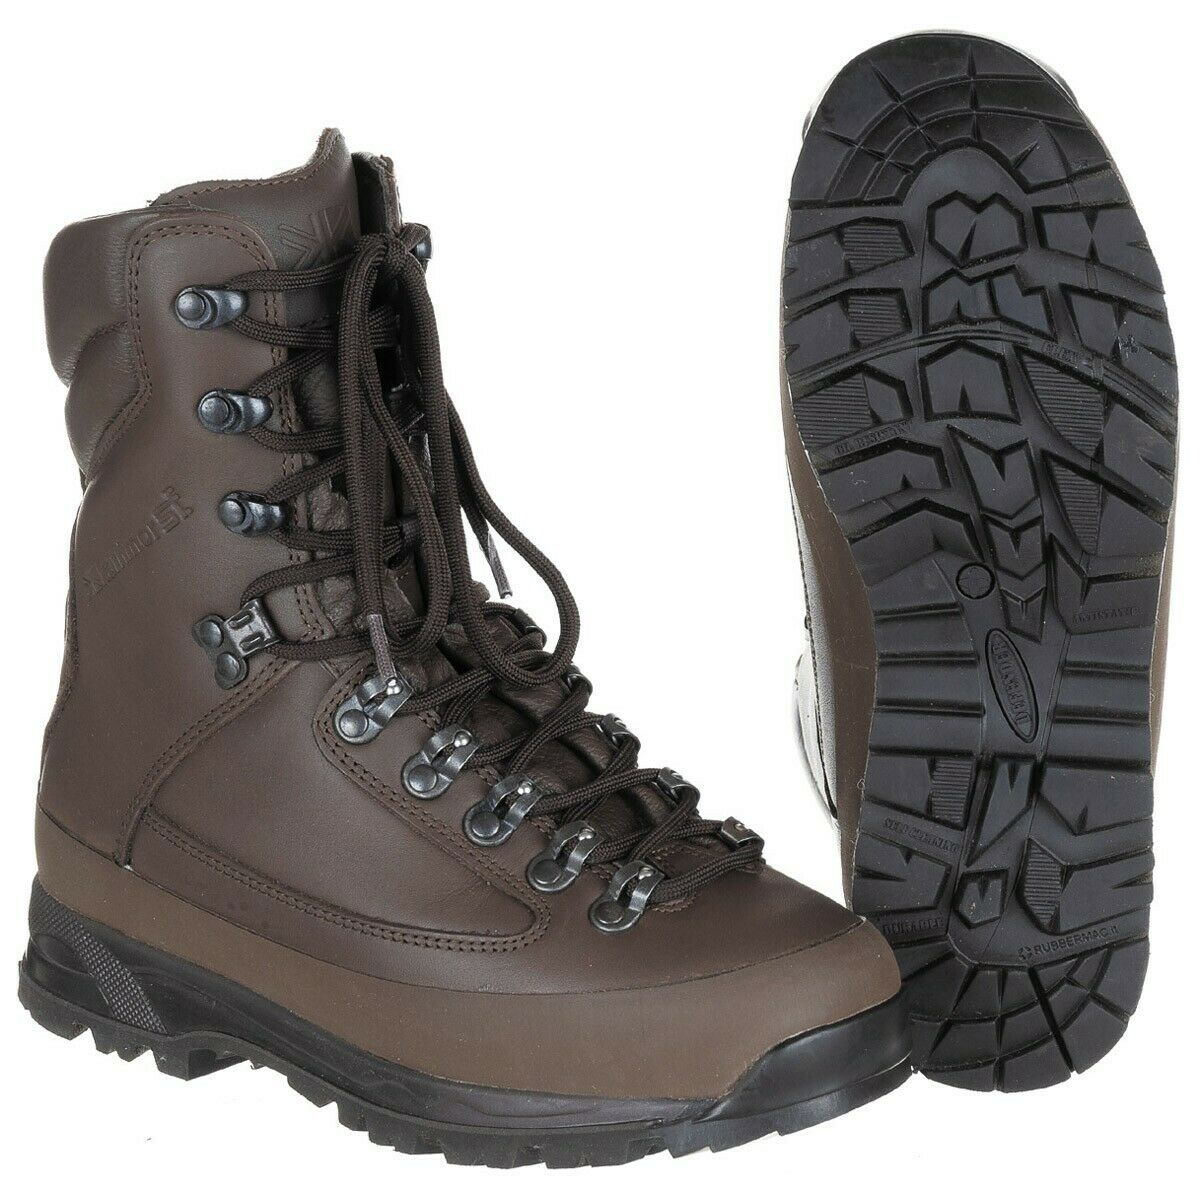 Karrimor SF Goretex Lined Cold/Wet Weather Boots